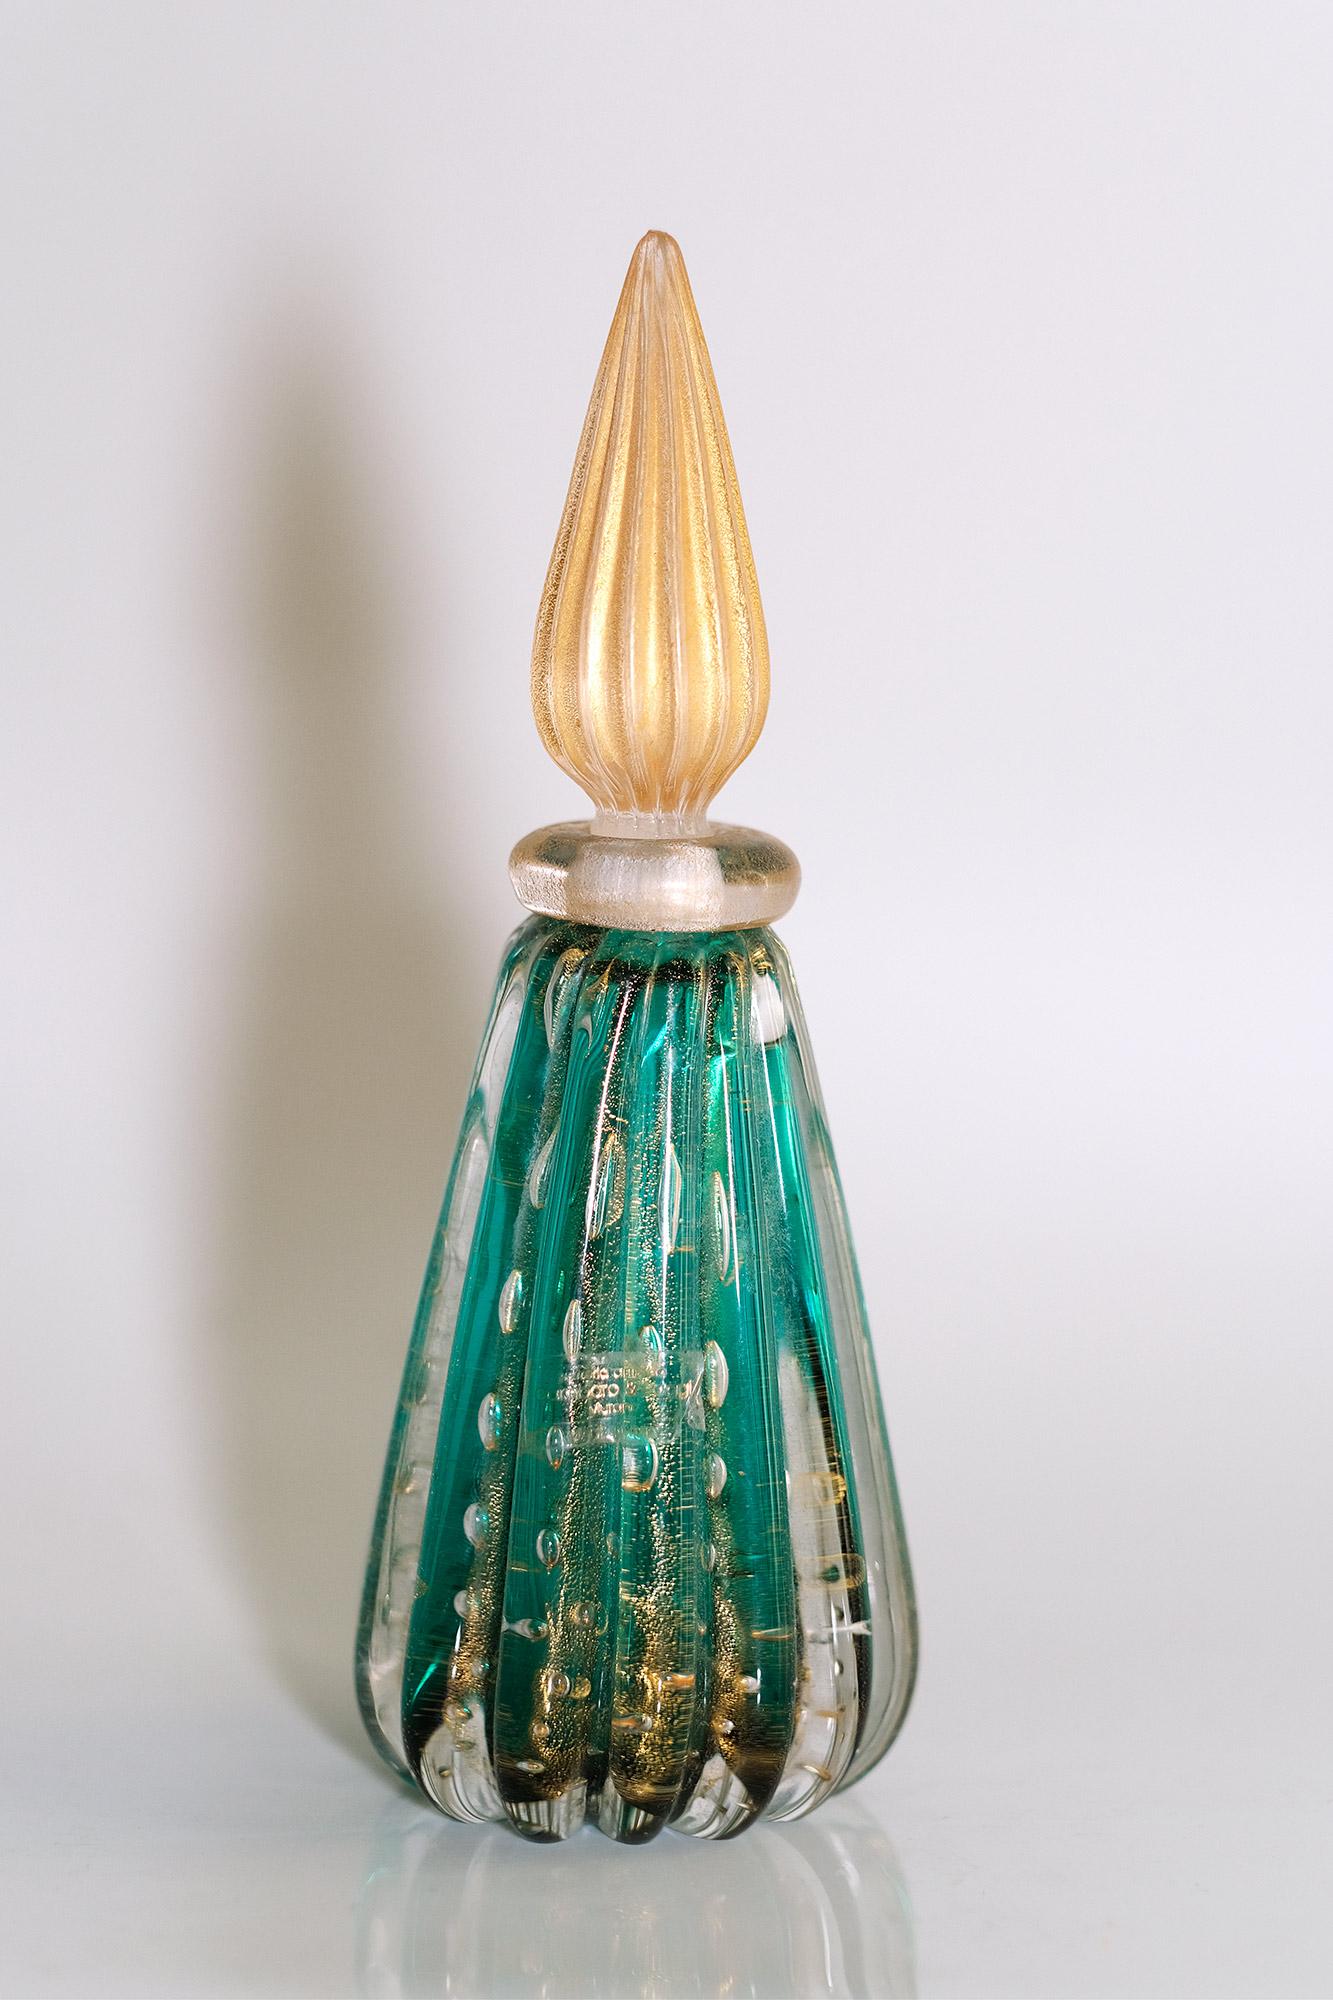 Splendid rare Murano Glass bottle with stopper by Gambaro & Poggi, Italy.
Heavy blown green glass with controlled bubbles and gold aventurine.
Original Tag.